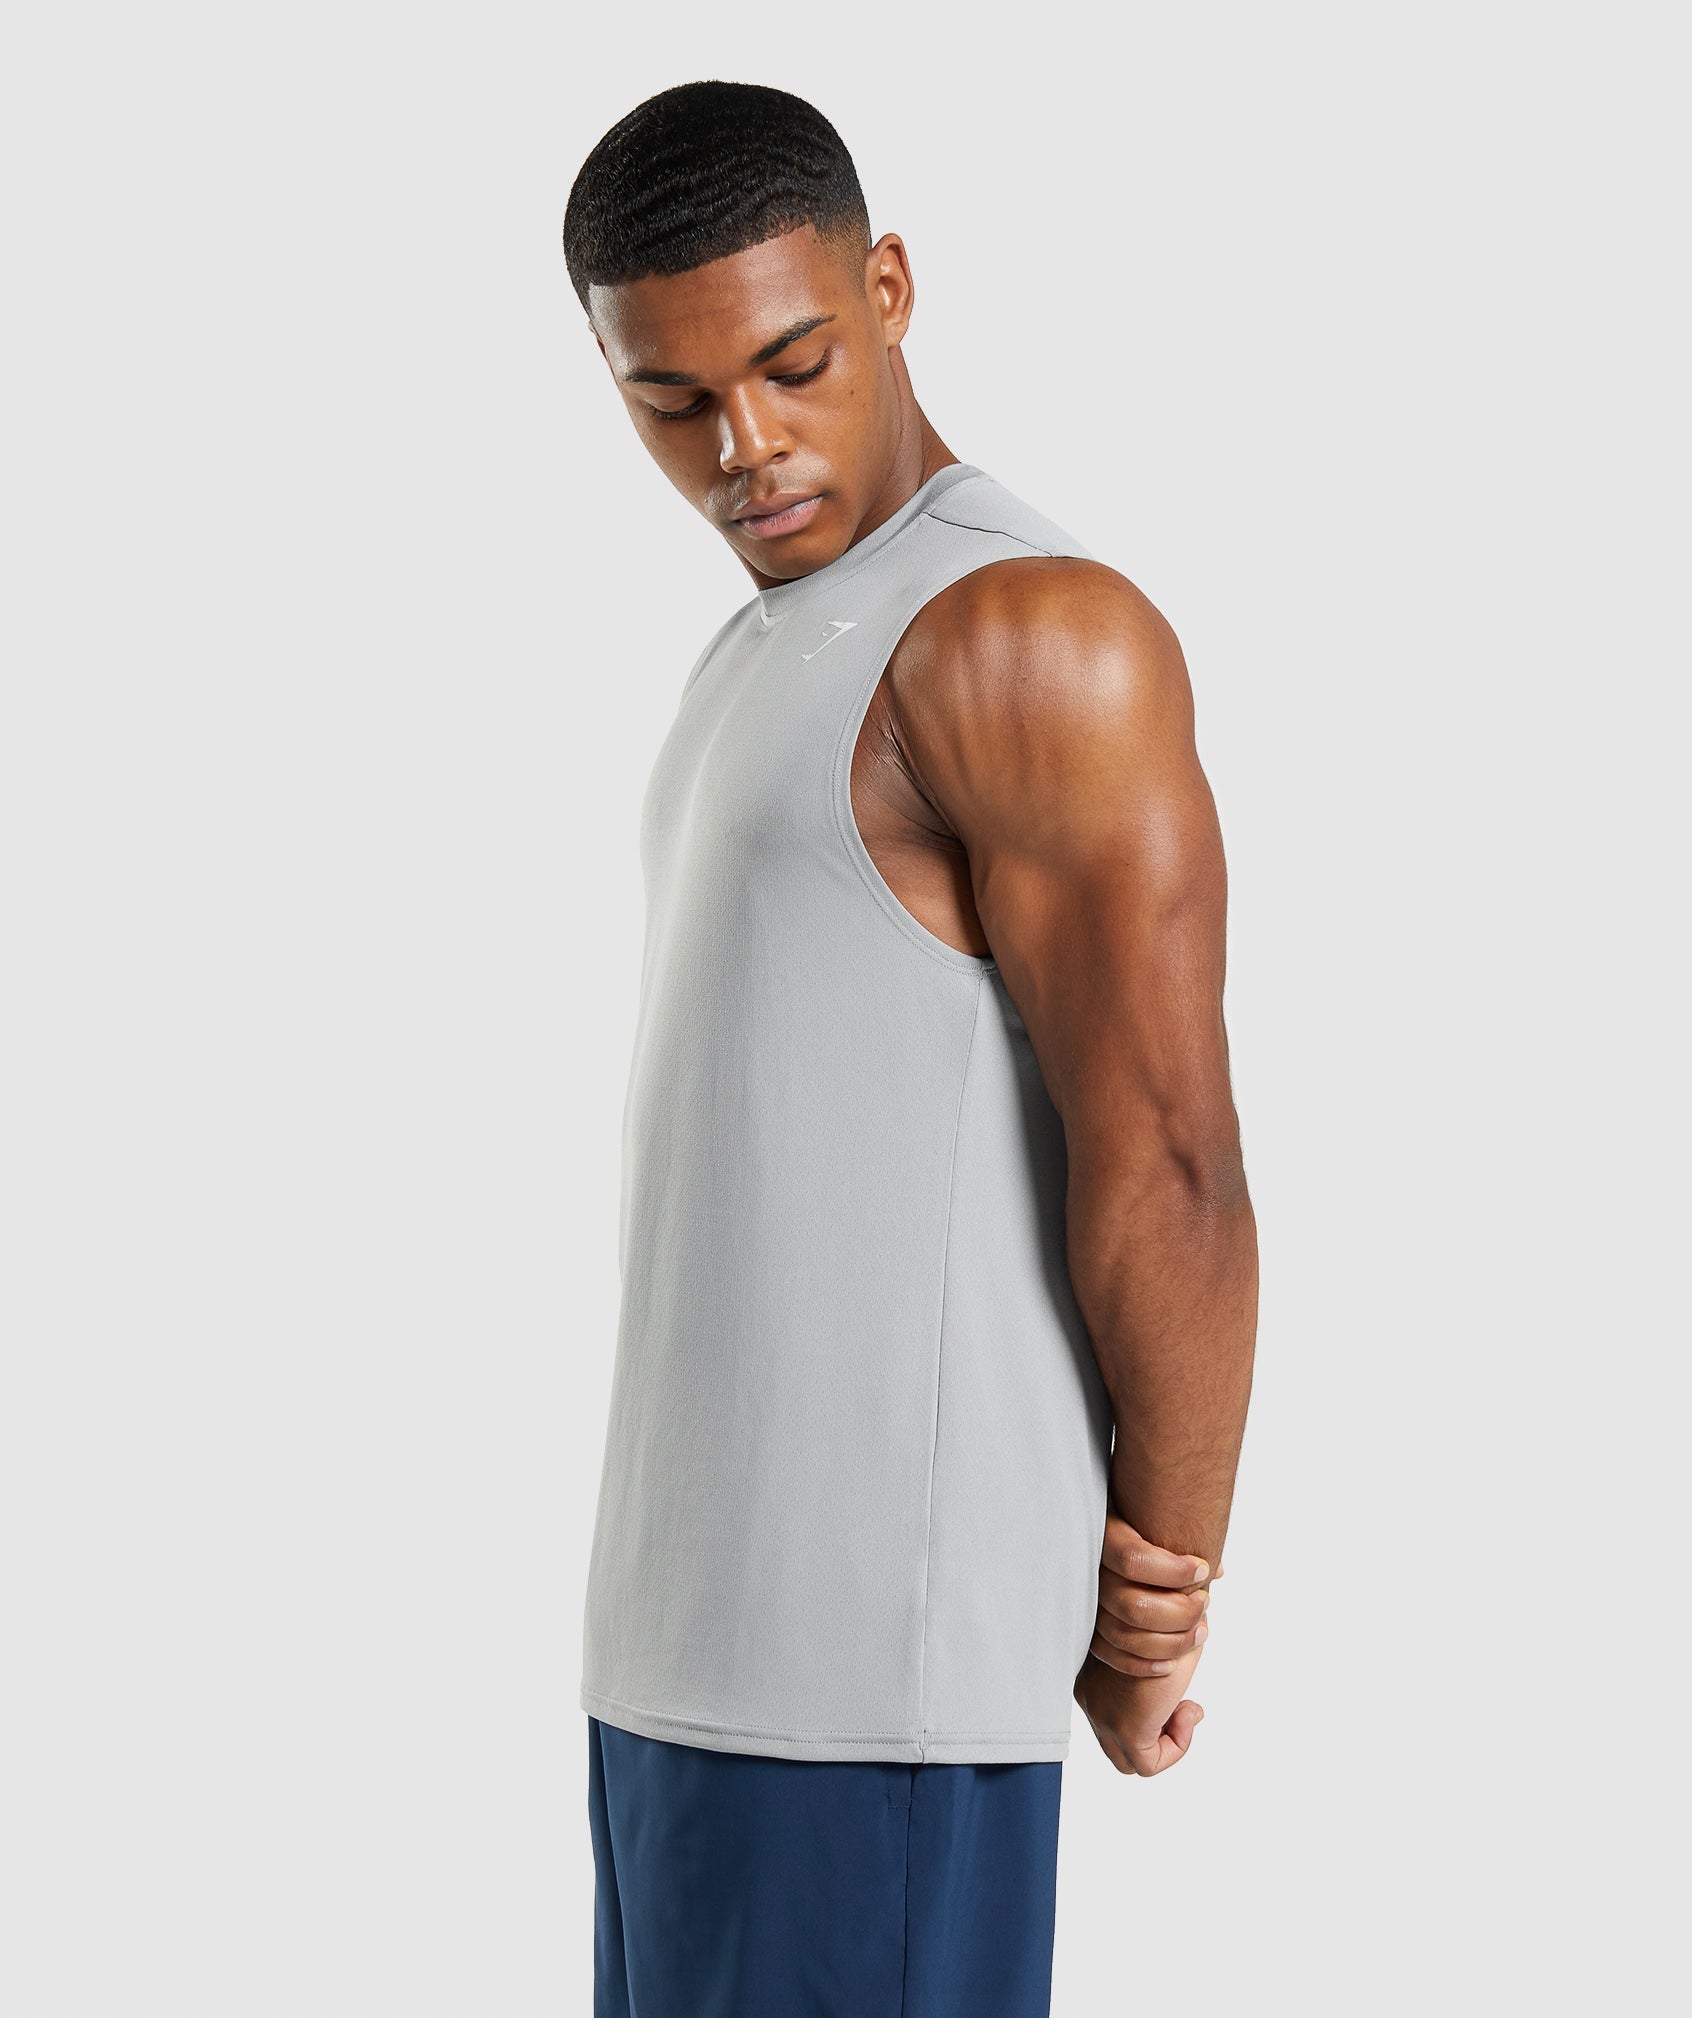 Arrival Sleeveless T-Shirt in Smokey Grey - view 2